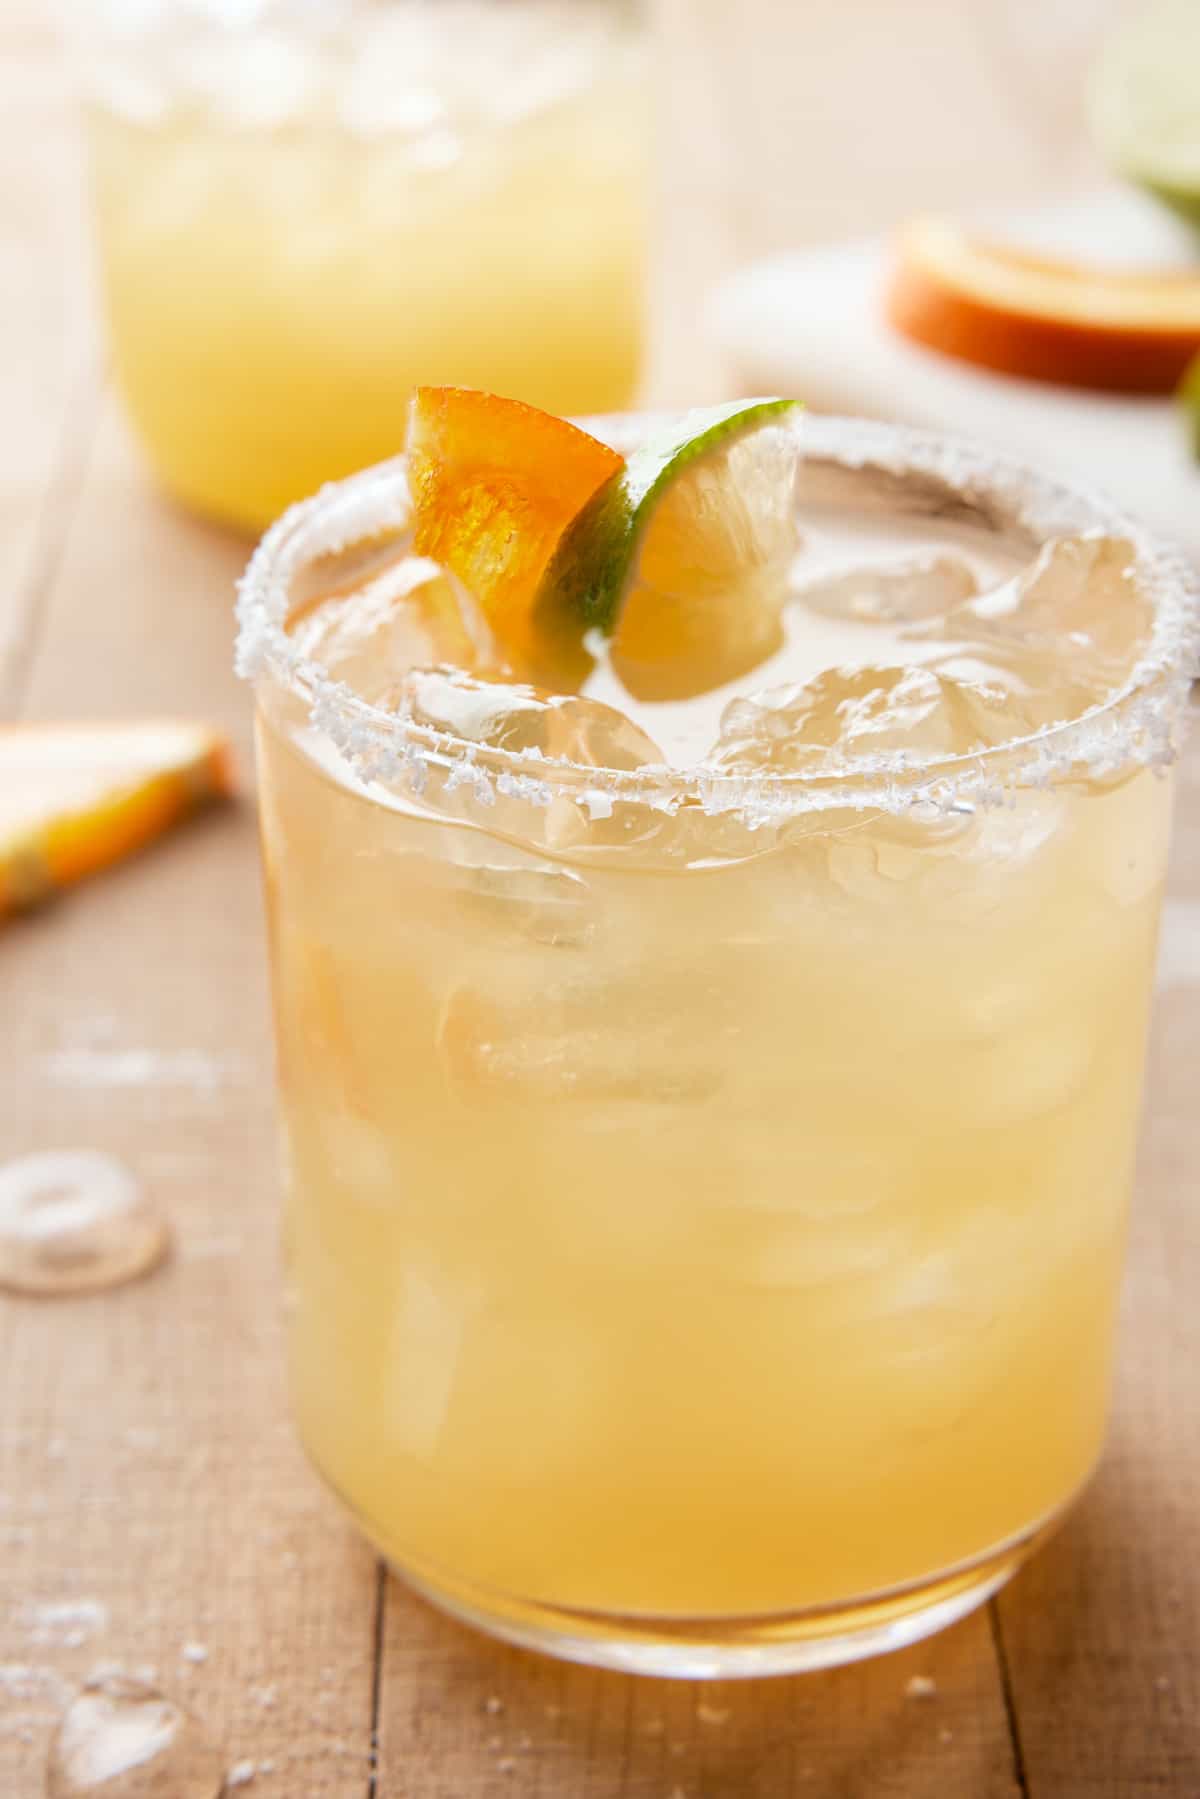 Salt rimmed glass filled with Italian Margarita and garnished with orange and lime, with shaker in back.